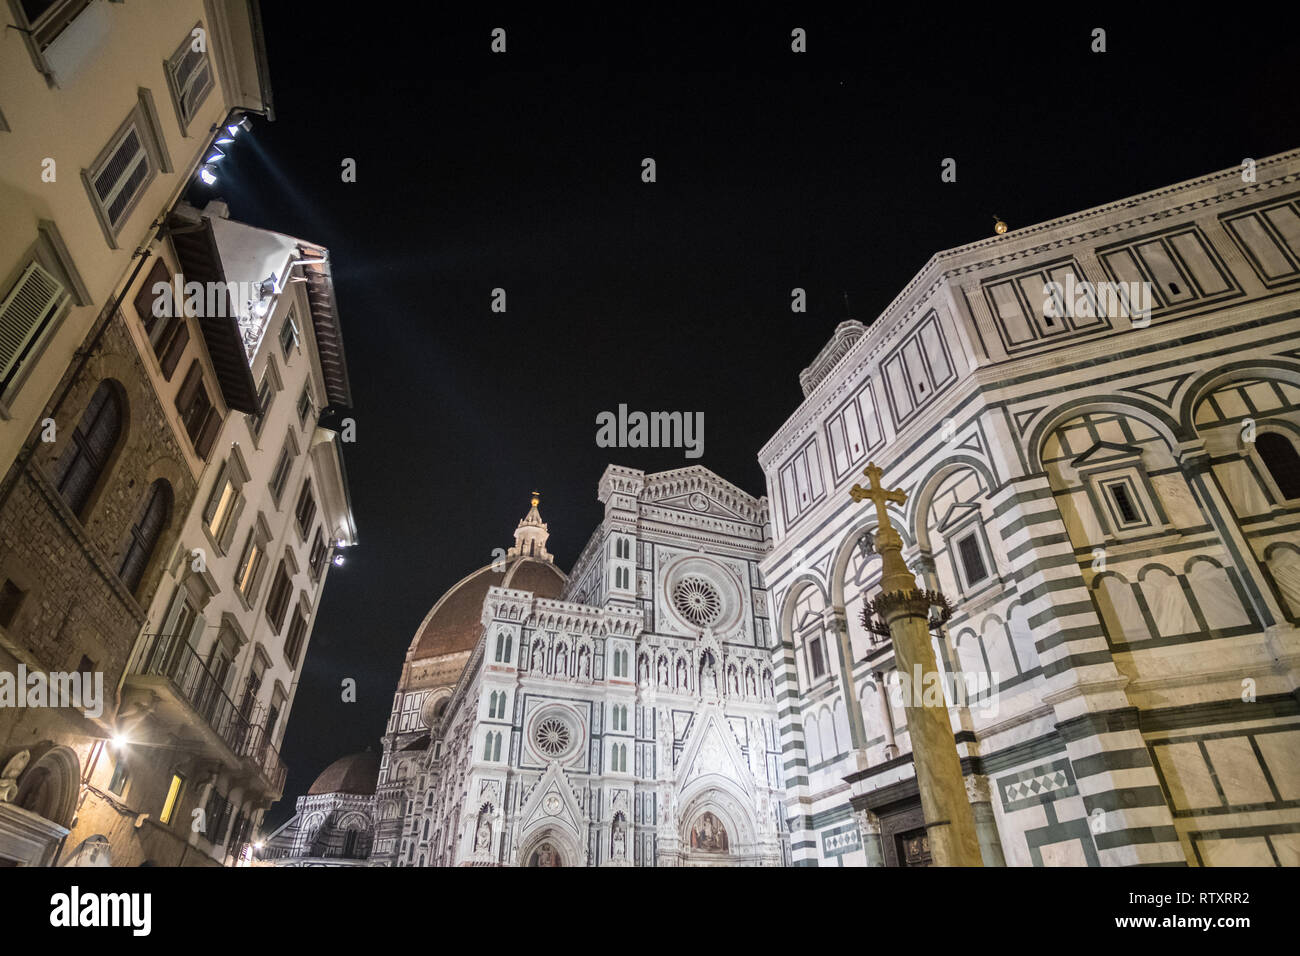 Florence Duomo Cathedral. Basilica di Santa Maria del Fiore or Basilica of Saint Mary of the Flower in Florence, Italy. At night. Stock Photo